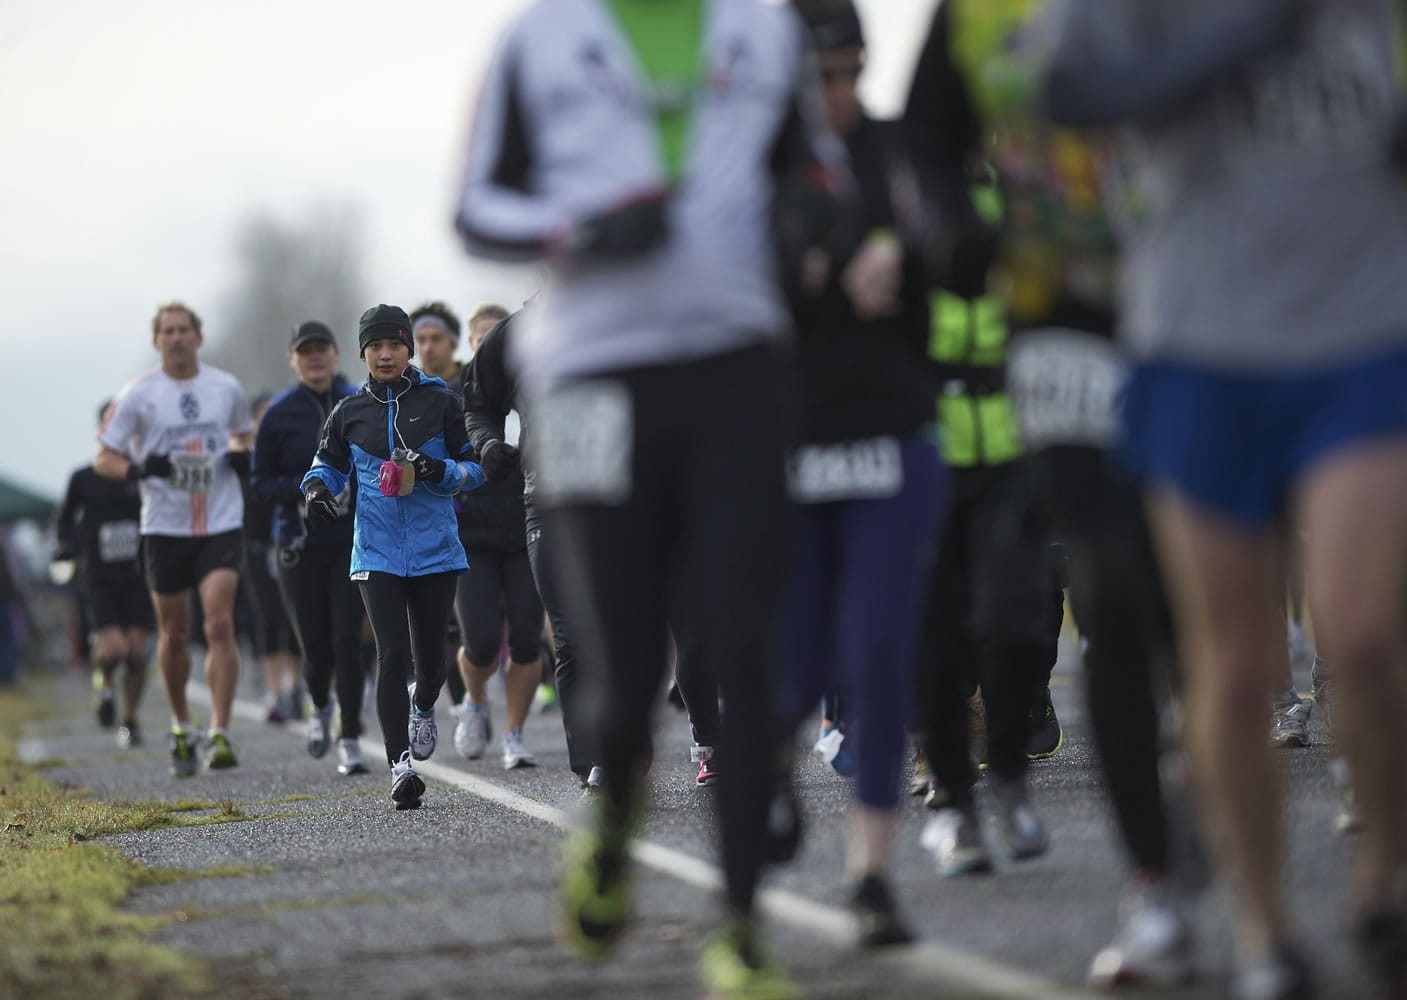 Runners compete in the annual Vancouver Lake Half Marathon at Vancouver Lake Park on Sunday.